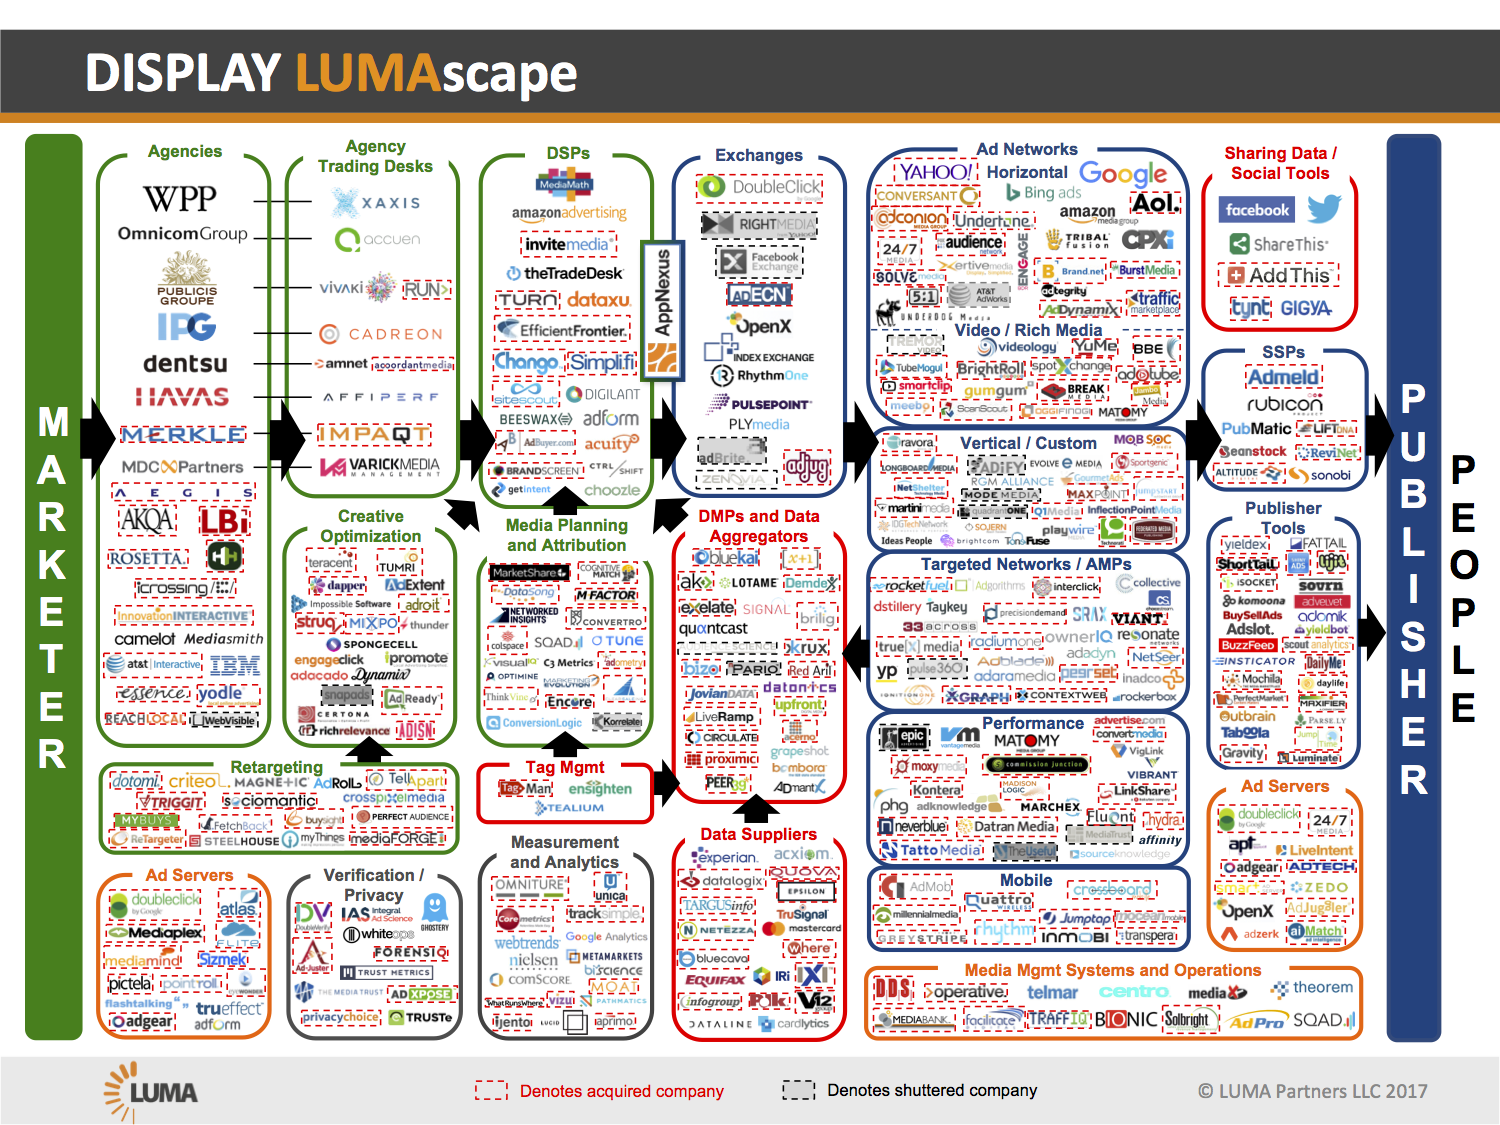 An overview landscape of companies involved in online display advertising; one of a series of popular landscape images from LUMA.